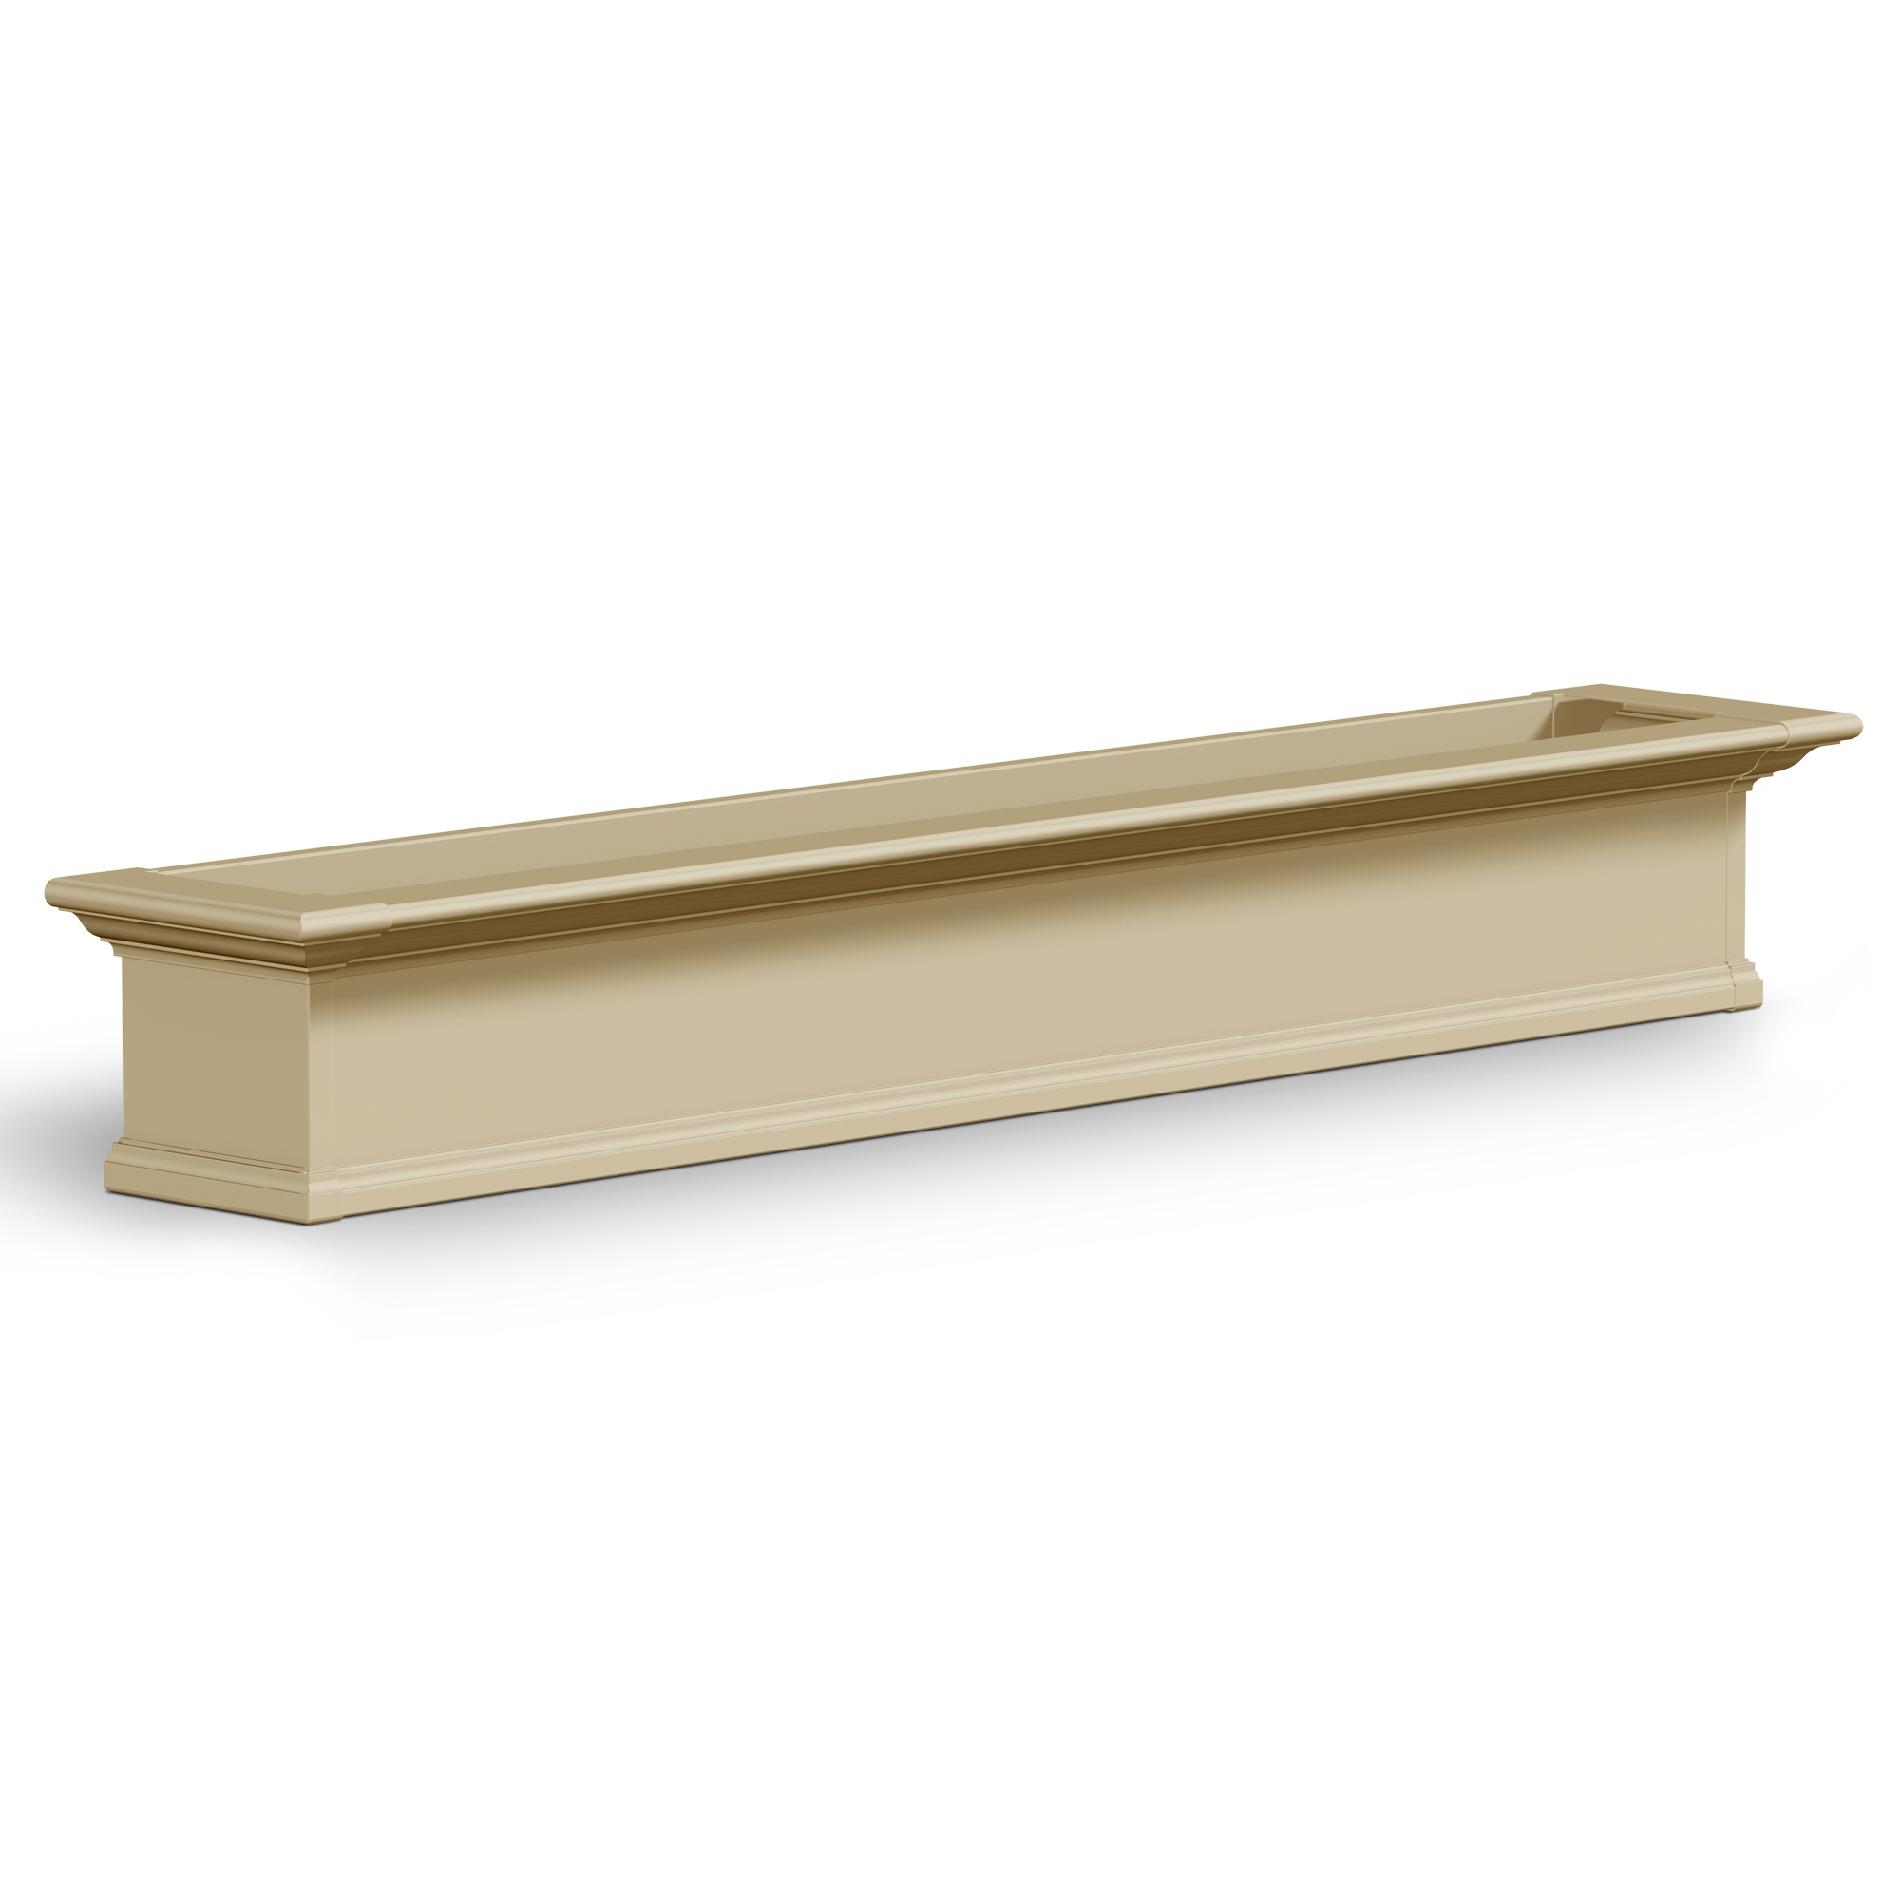 Yorkshire Window Box 6FT White Or Clay "KD"